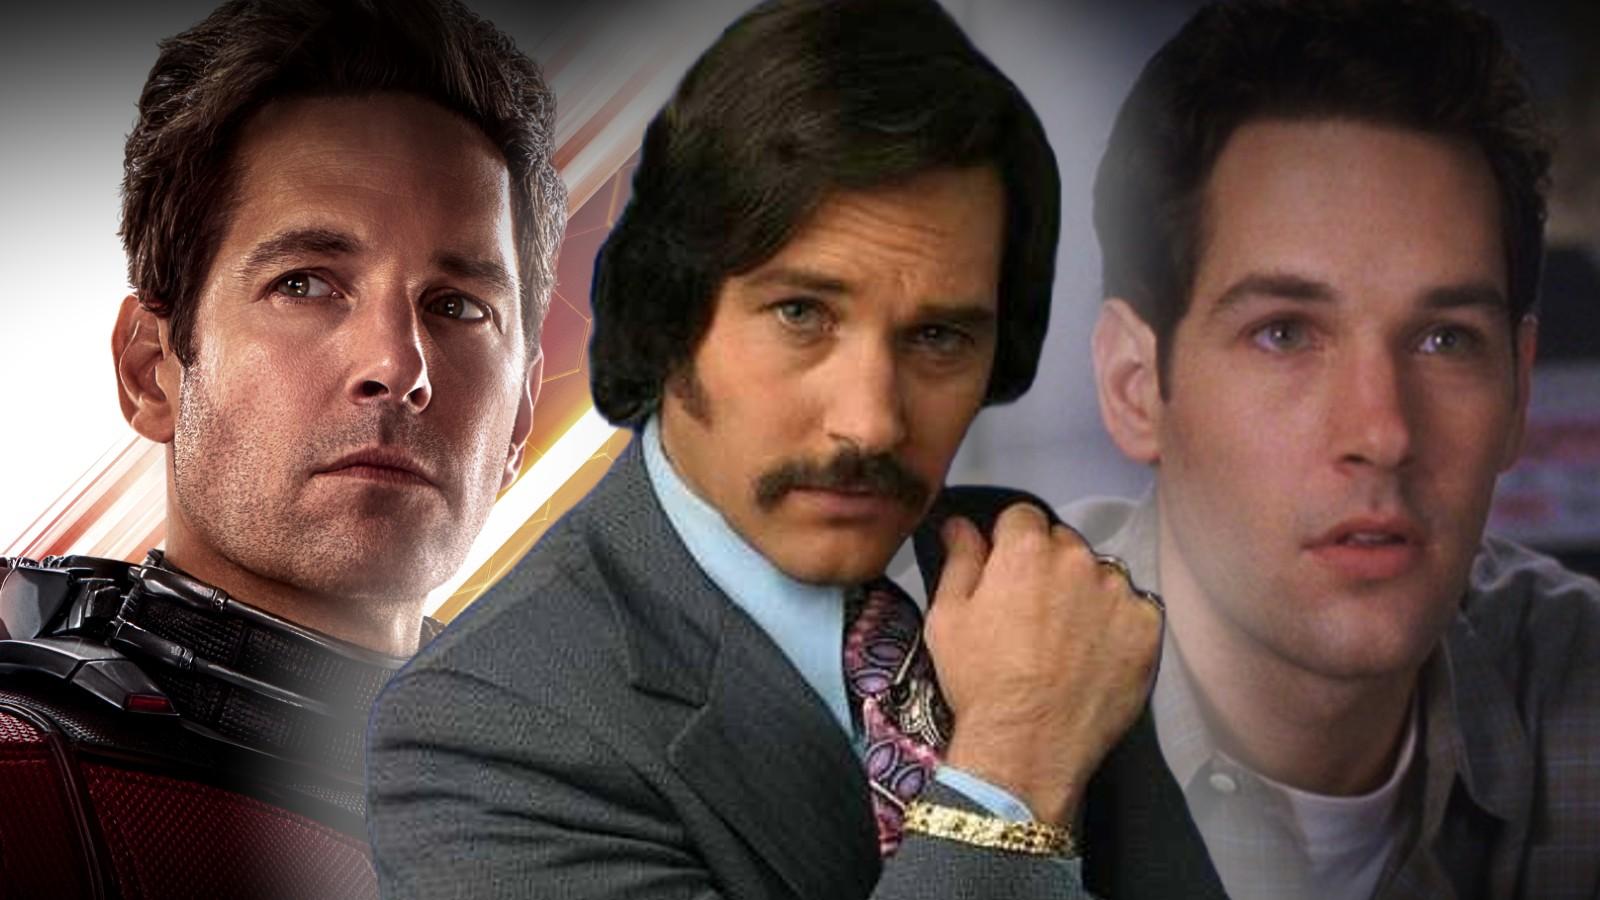 Paul Rudd in Ant-Man, Anchorman, and Clueless